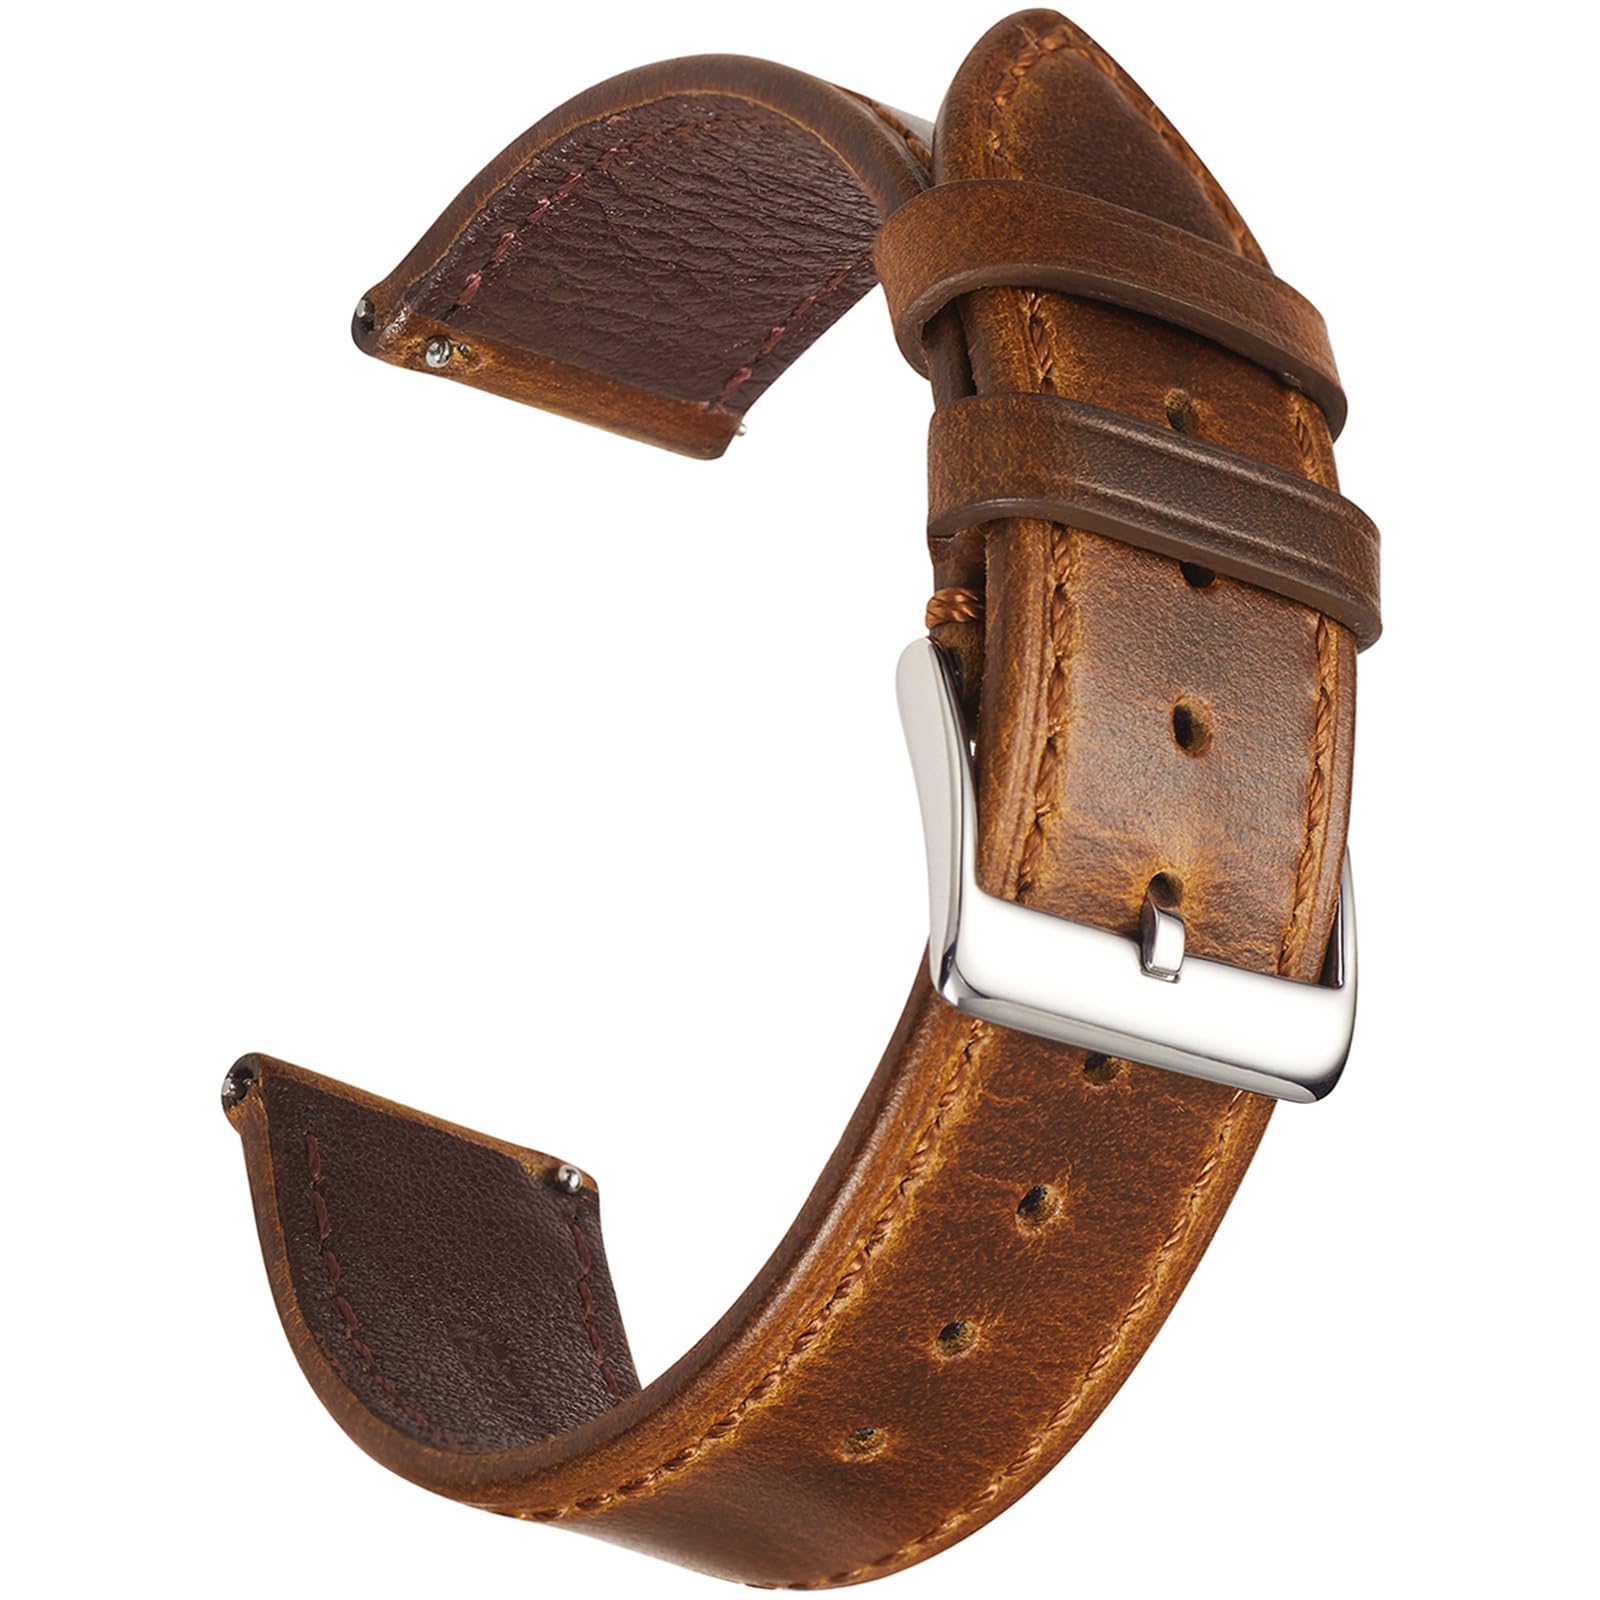 Getalia Leather Watch Band, Italian Crazy Horse/Oil-Waxed/Vegetable-Tanned Leather, Quick Release Watch Strap for Men and Women, Band Width 18mm 19mm 20mm 21mm 22mm